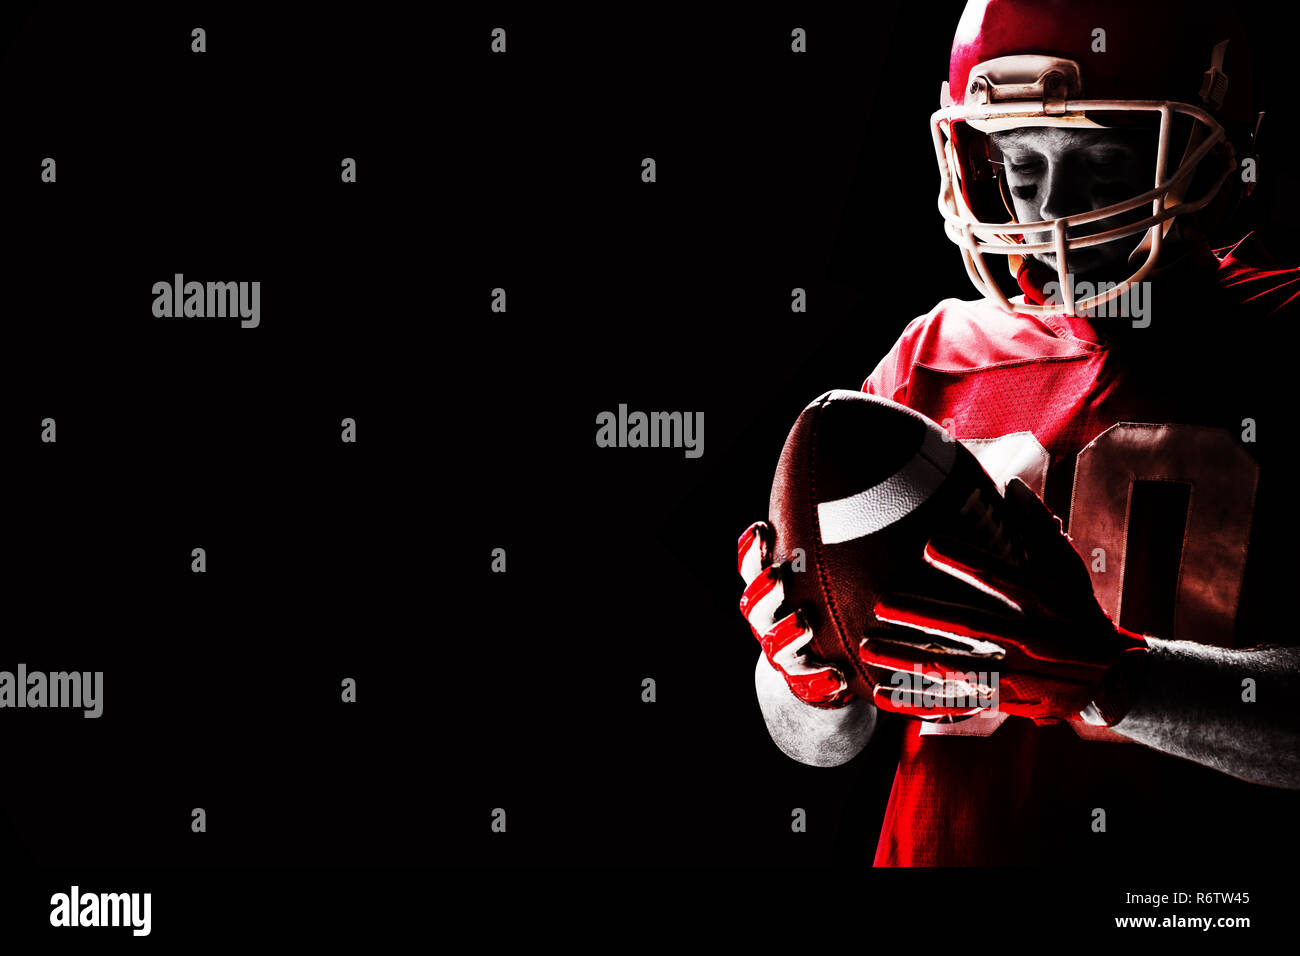 Young American football player standing with rugby helmet and rugby ball Stock Photo